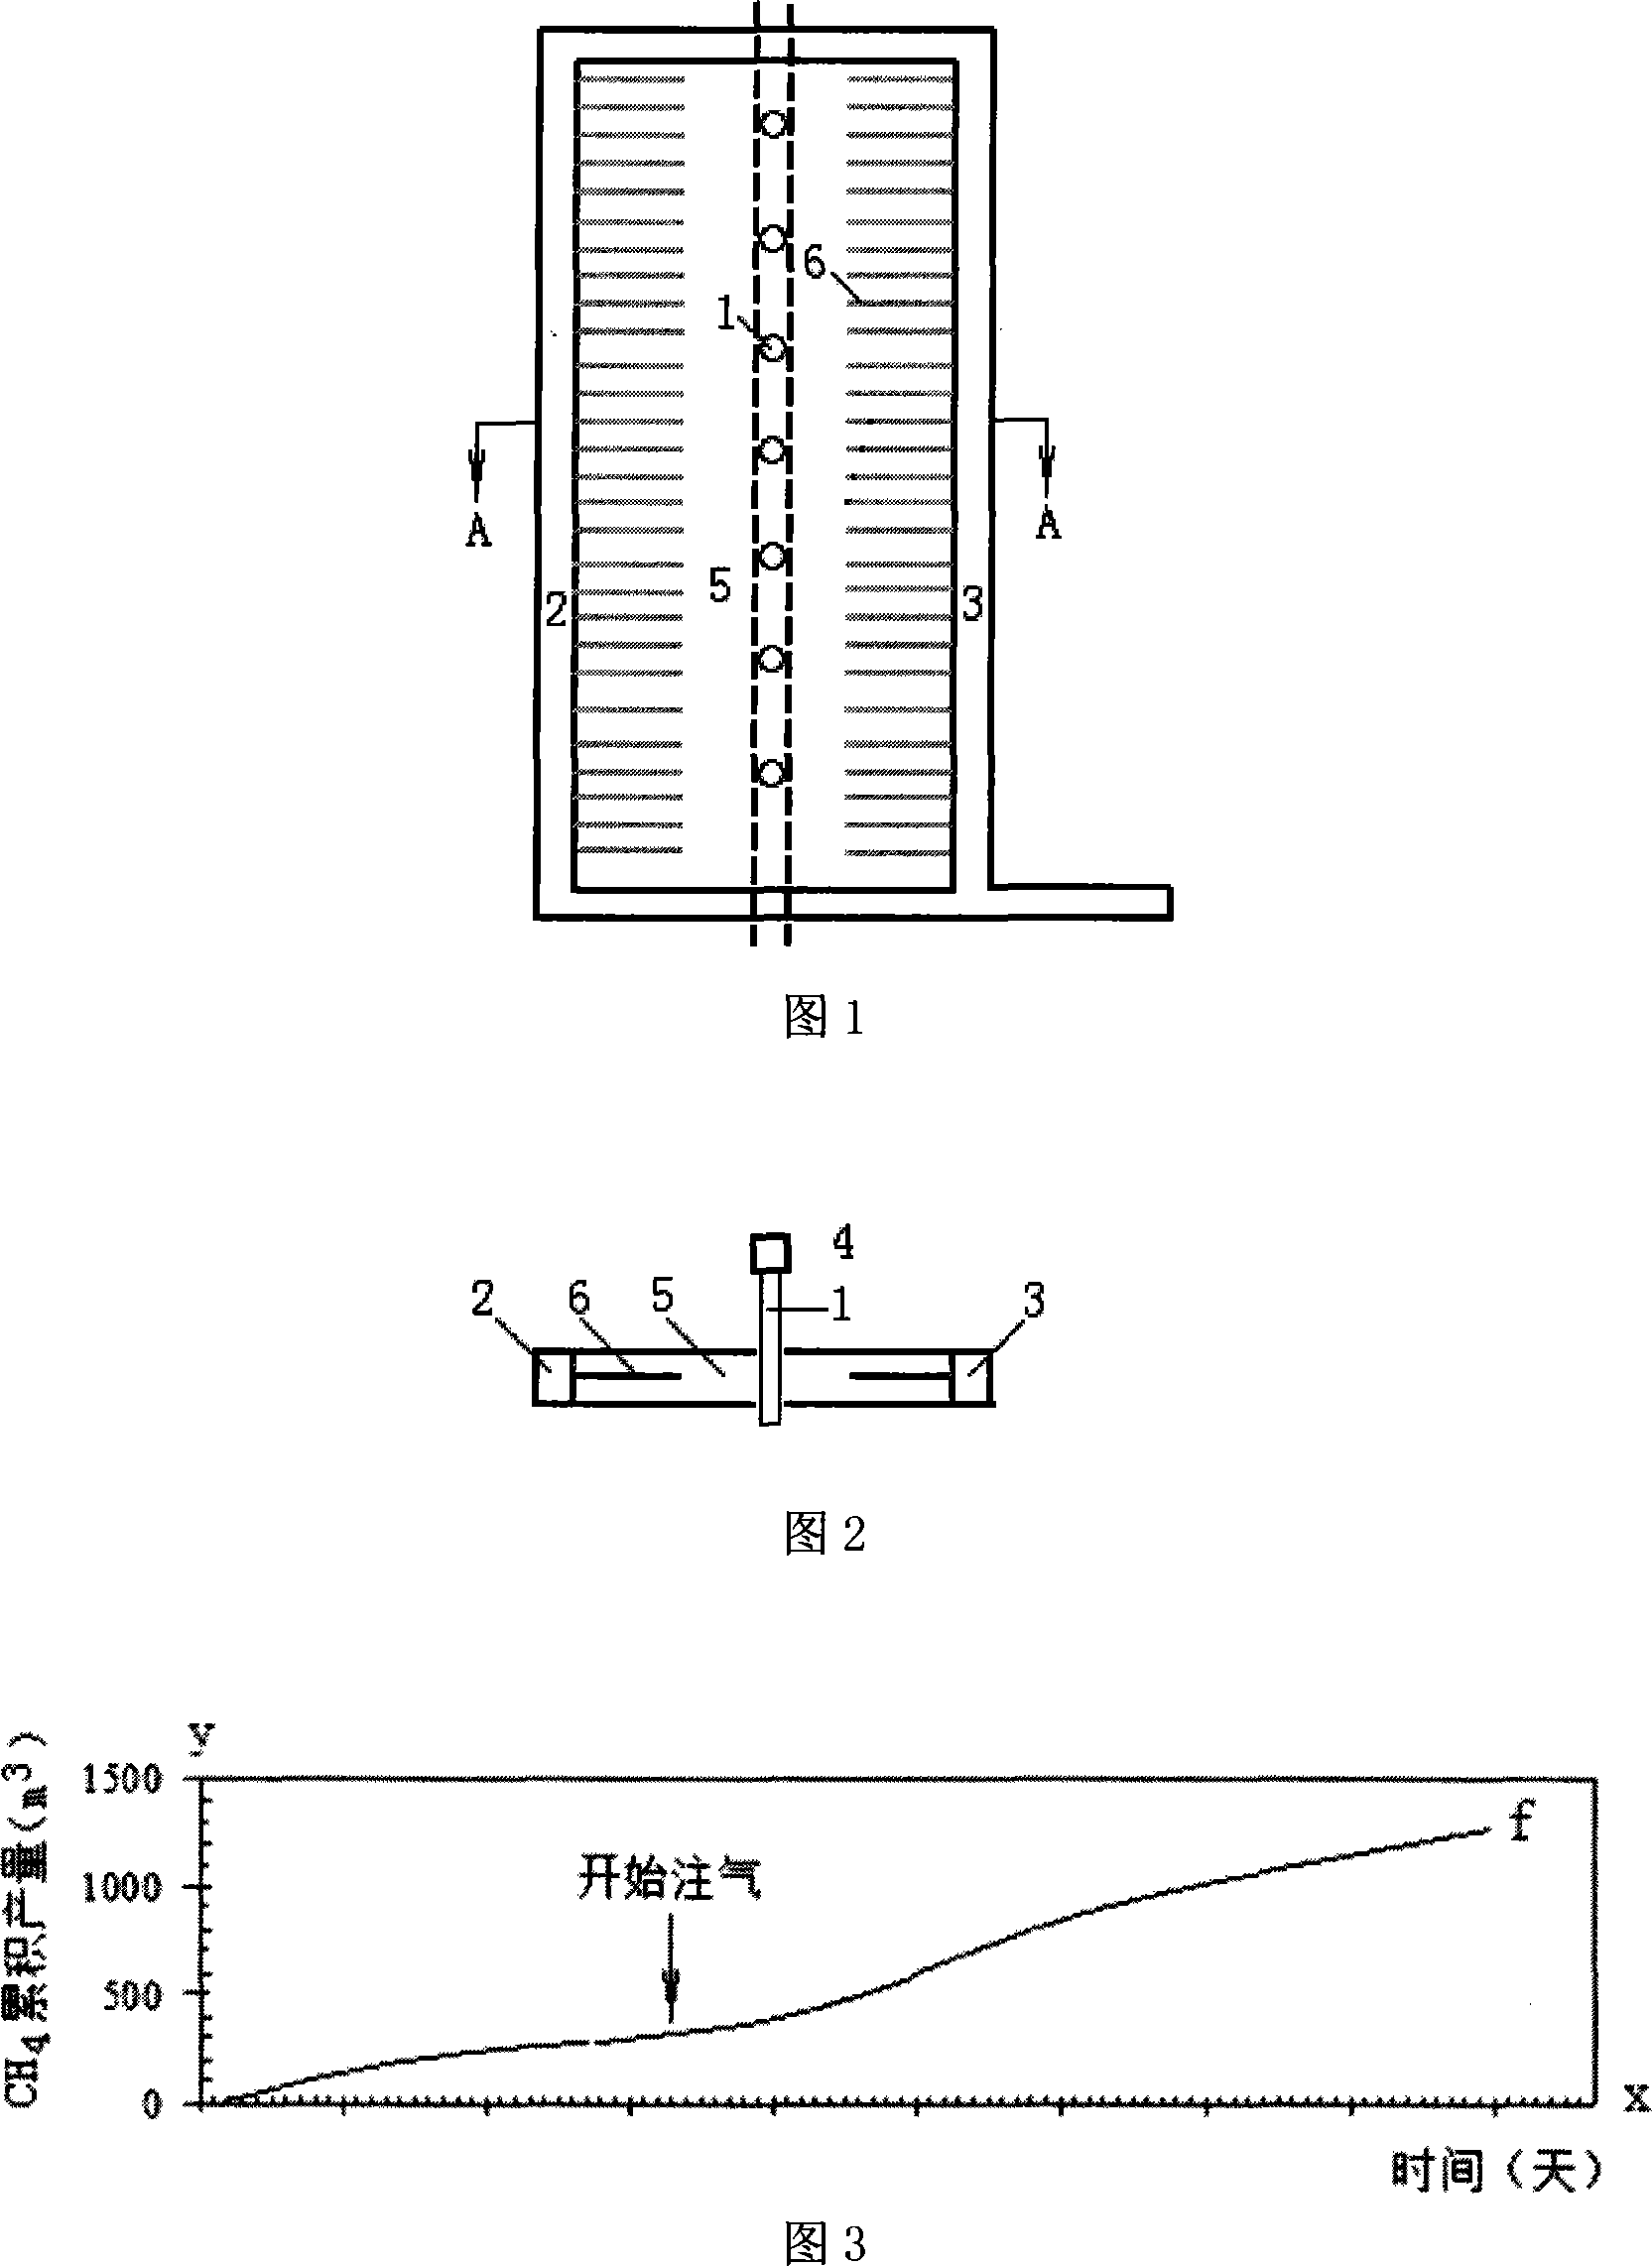 Down-hole pump drainage laneway exploitation system for mixing gas dispelling coal gas, and the method